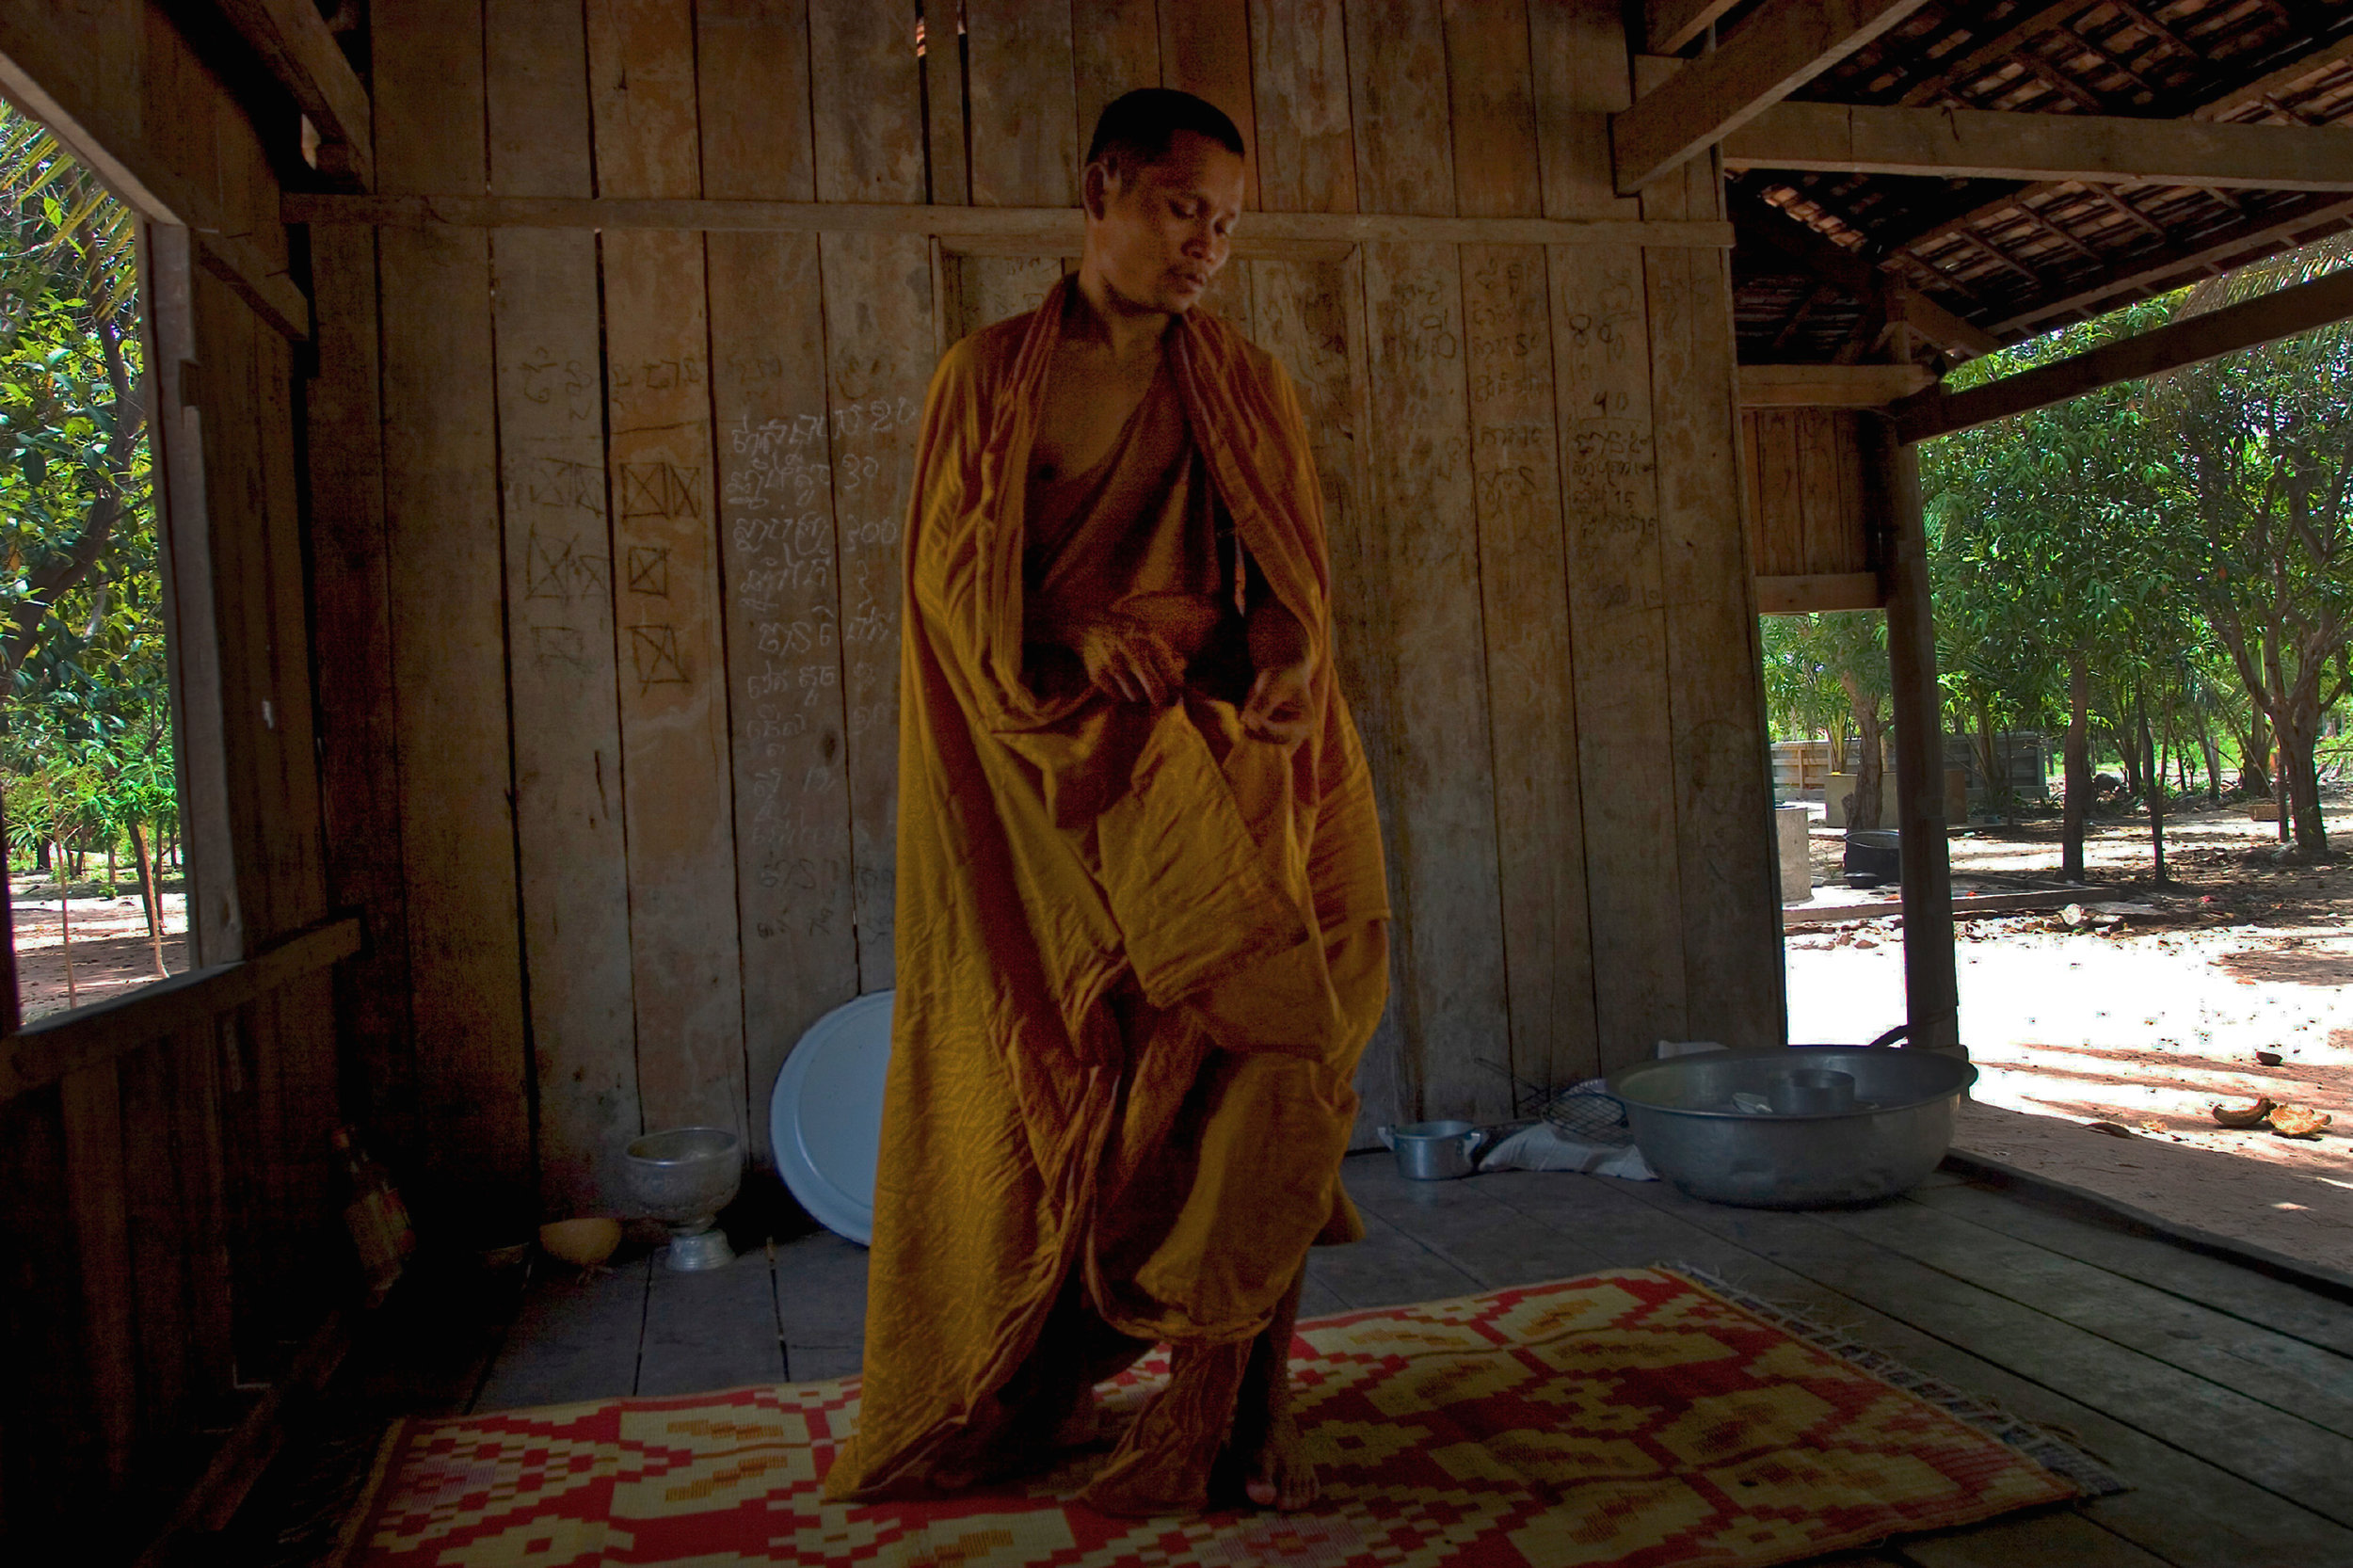  A Buddhist Monk suffering from Malaria awakes from a fitful sleep. Siem Reap district Cambodia. 2010 